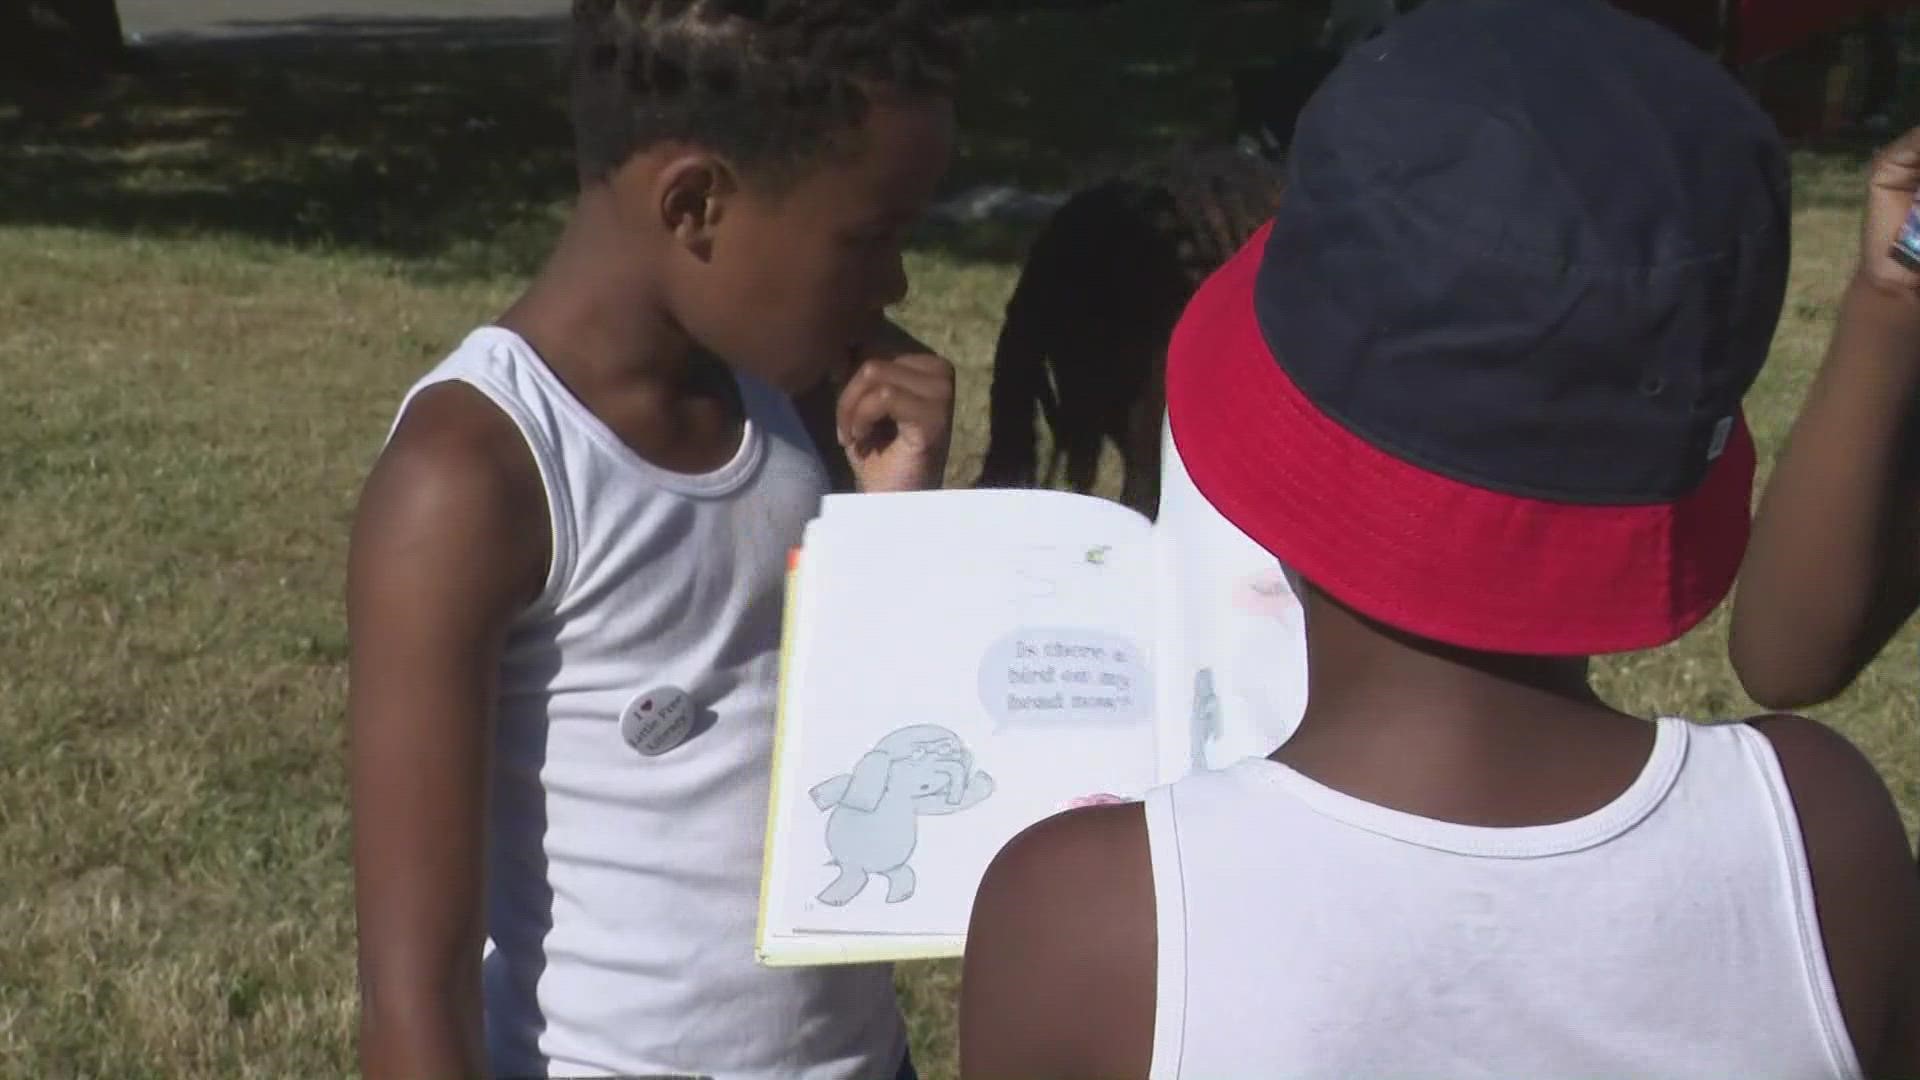 With summer vacation in full swing, 3News' Jay Crawford spoke with two local literacy advocates about the importance keeping books accessible to kids all year round.